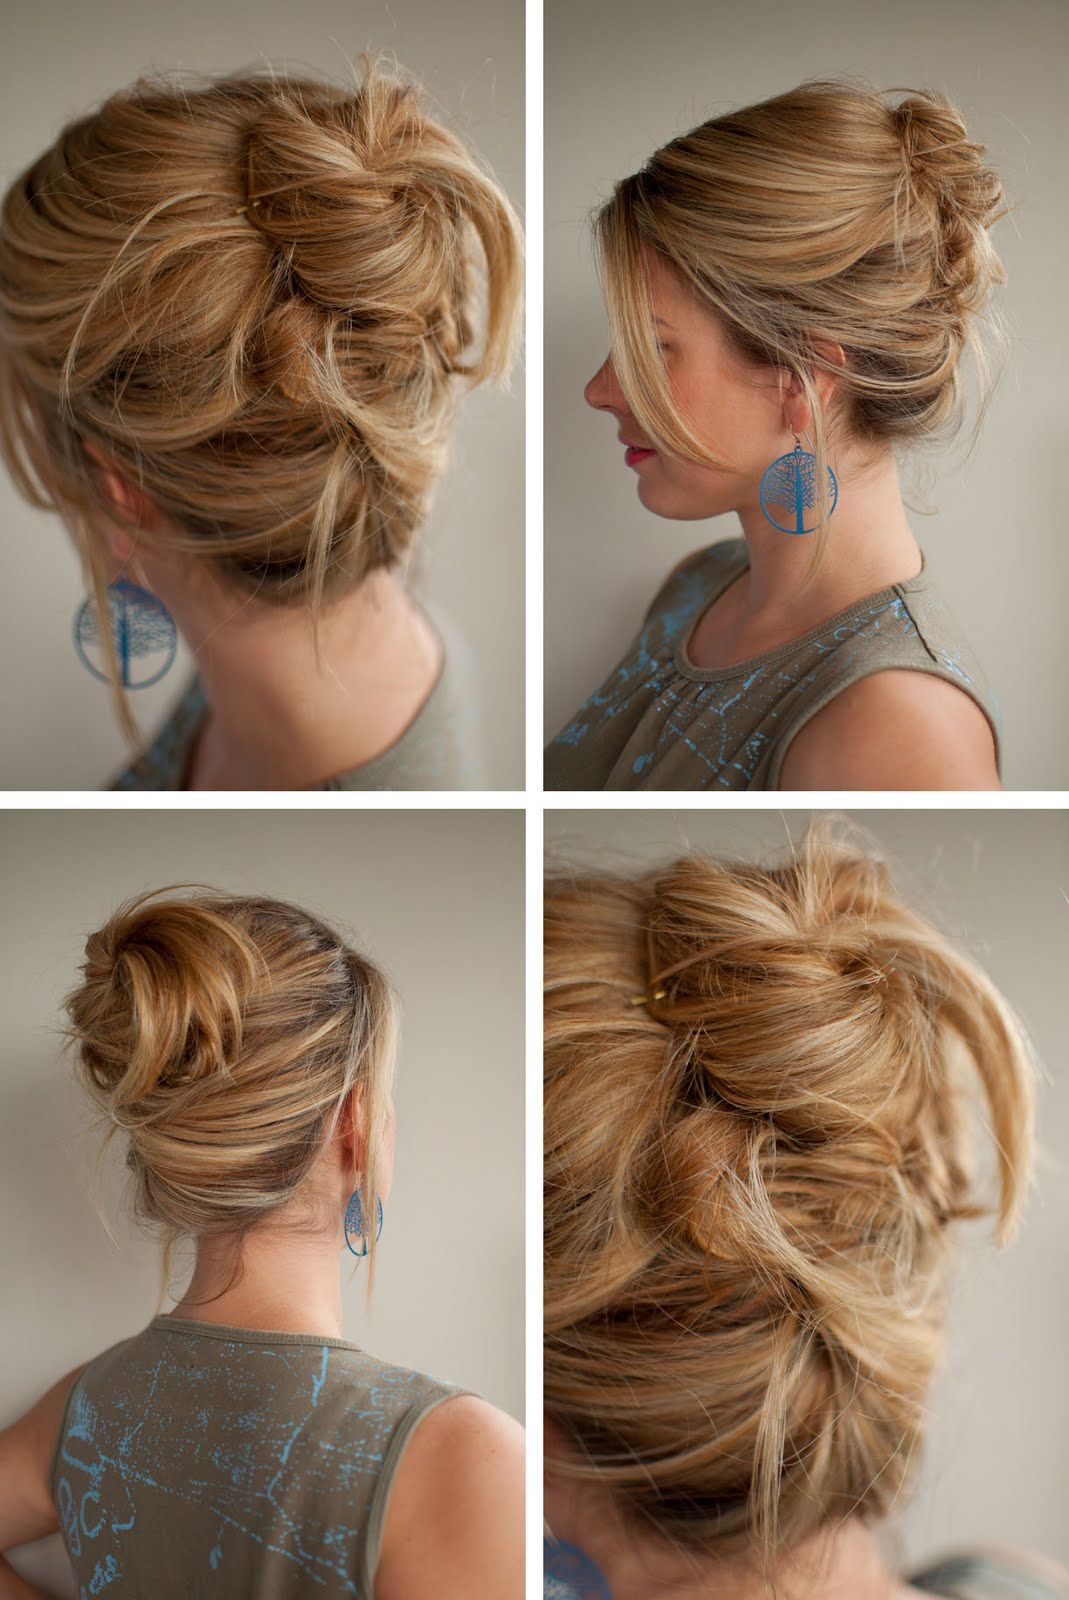 30 Days of Twist & Pin Hairstyles – Day 22